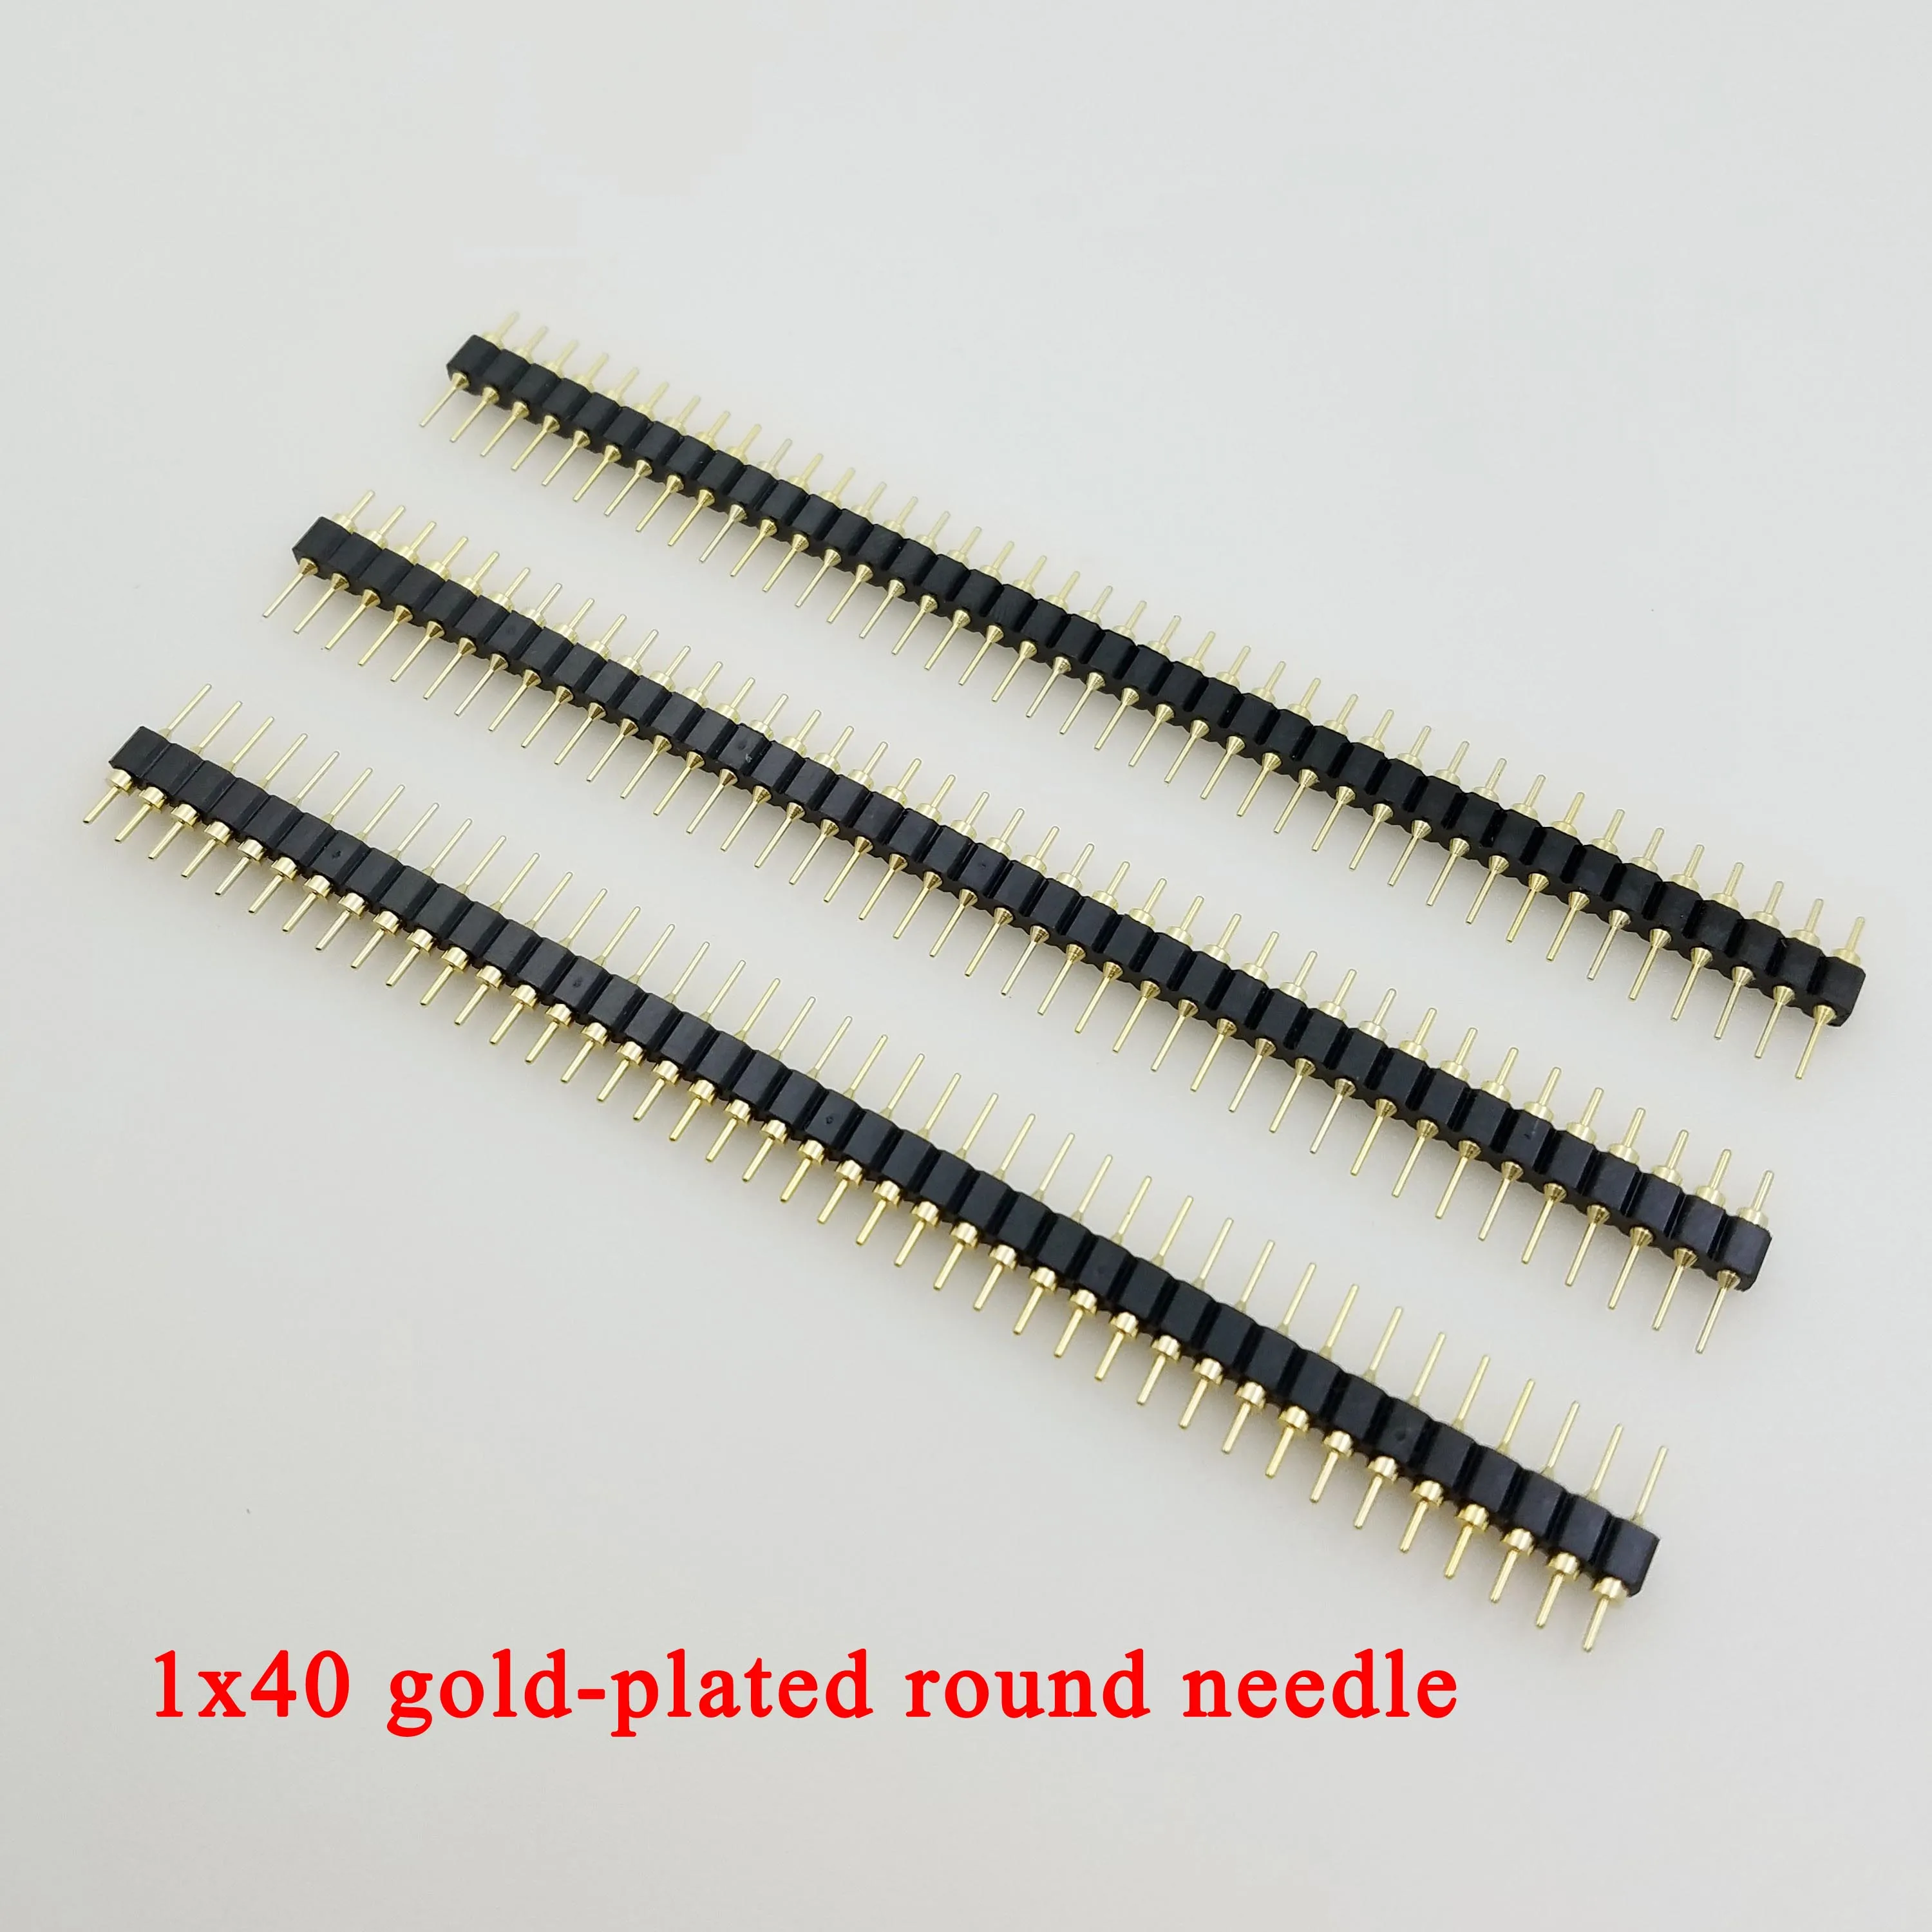 

5pcs 40 Pin Connector Header Round Needle 1x40 Golden Pin Single Row Male 2.54mm Breakable Pin Connector Strip 1*40